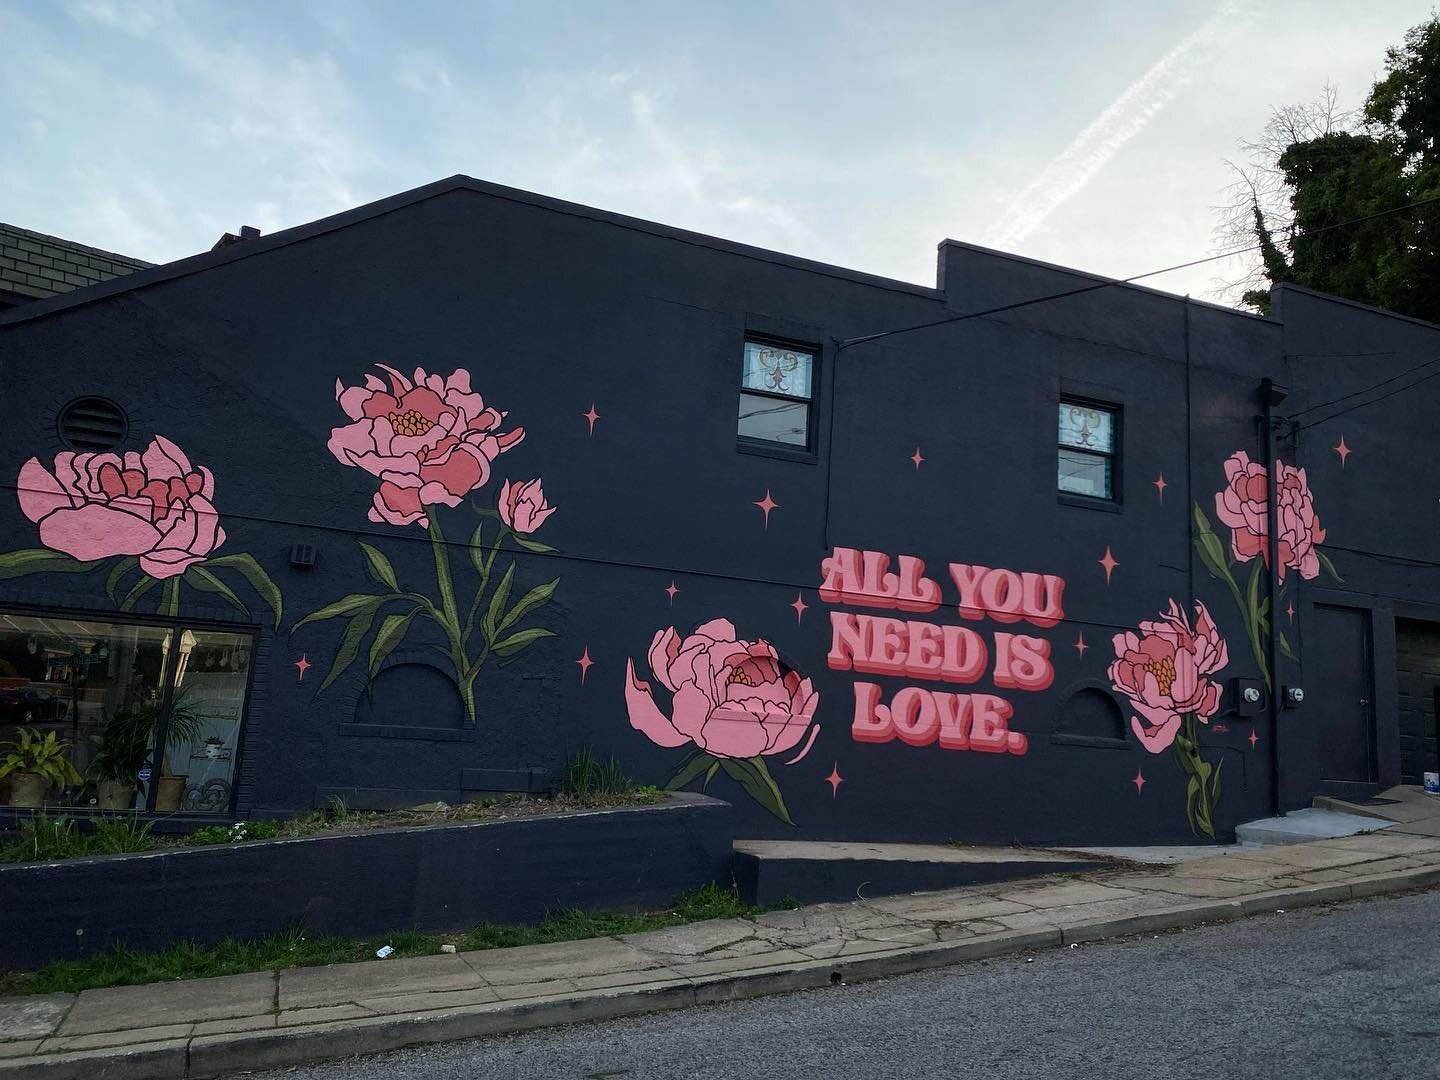 A mural created for @theflowercartbaltimore in the Hamilton neighborhood of Baltimore. Family owned and operated florist serving Baltimore since 1961! It was a pleasure to work with them. This project was initiated before the lockdown and it&rsquo;s 